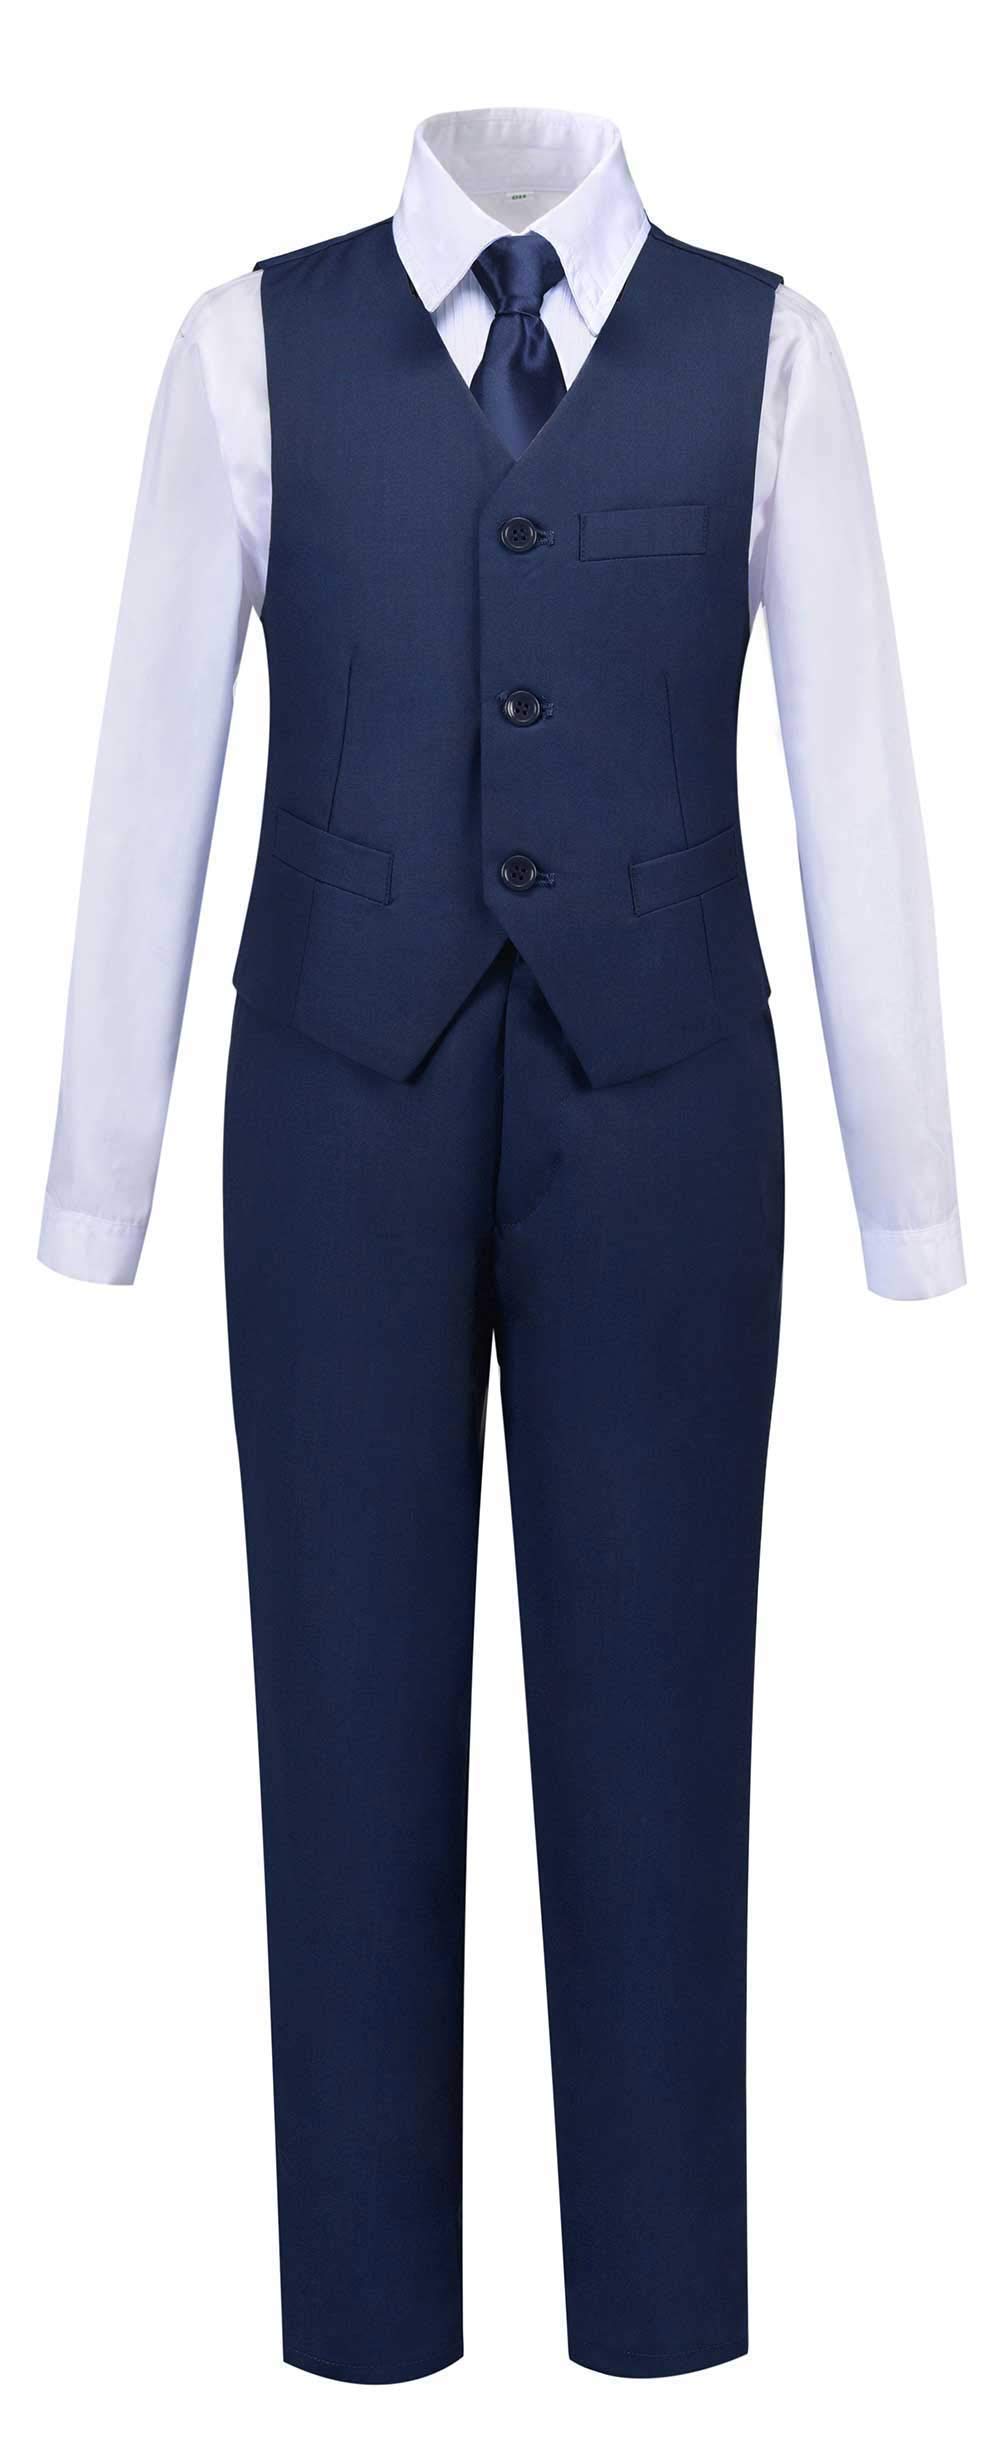 Addneo Big Boys Suits Navy Kids Easter Outfits With Dress Pants Vest White Shirt And Tie Size 12